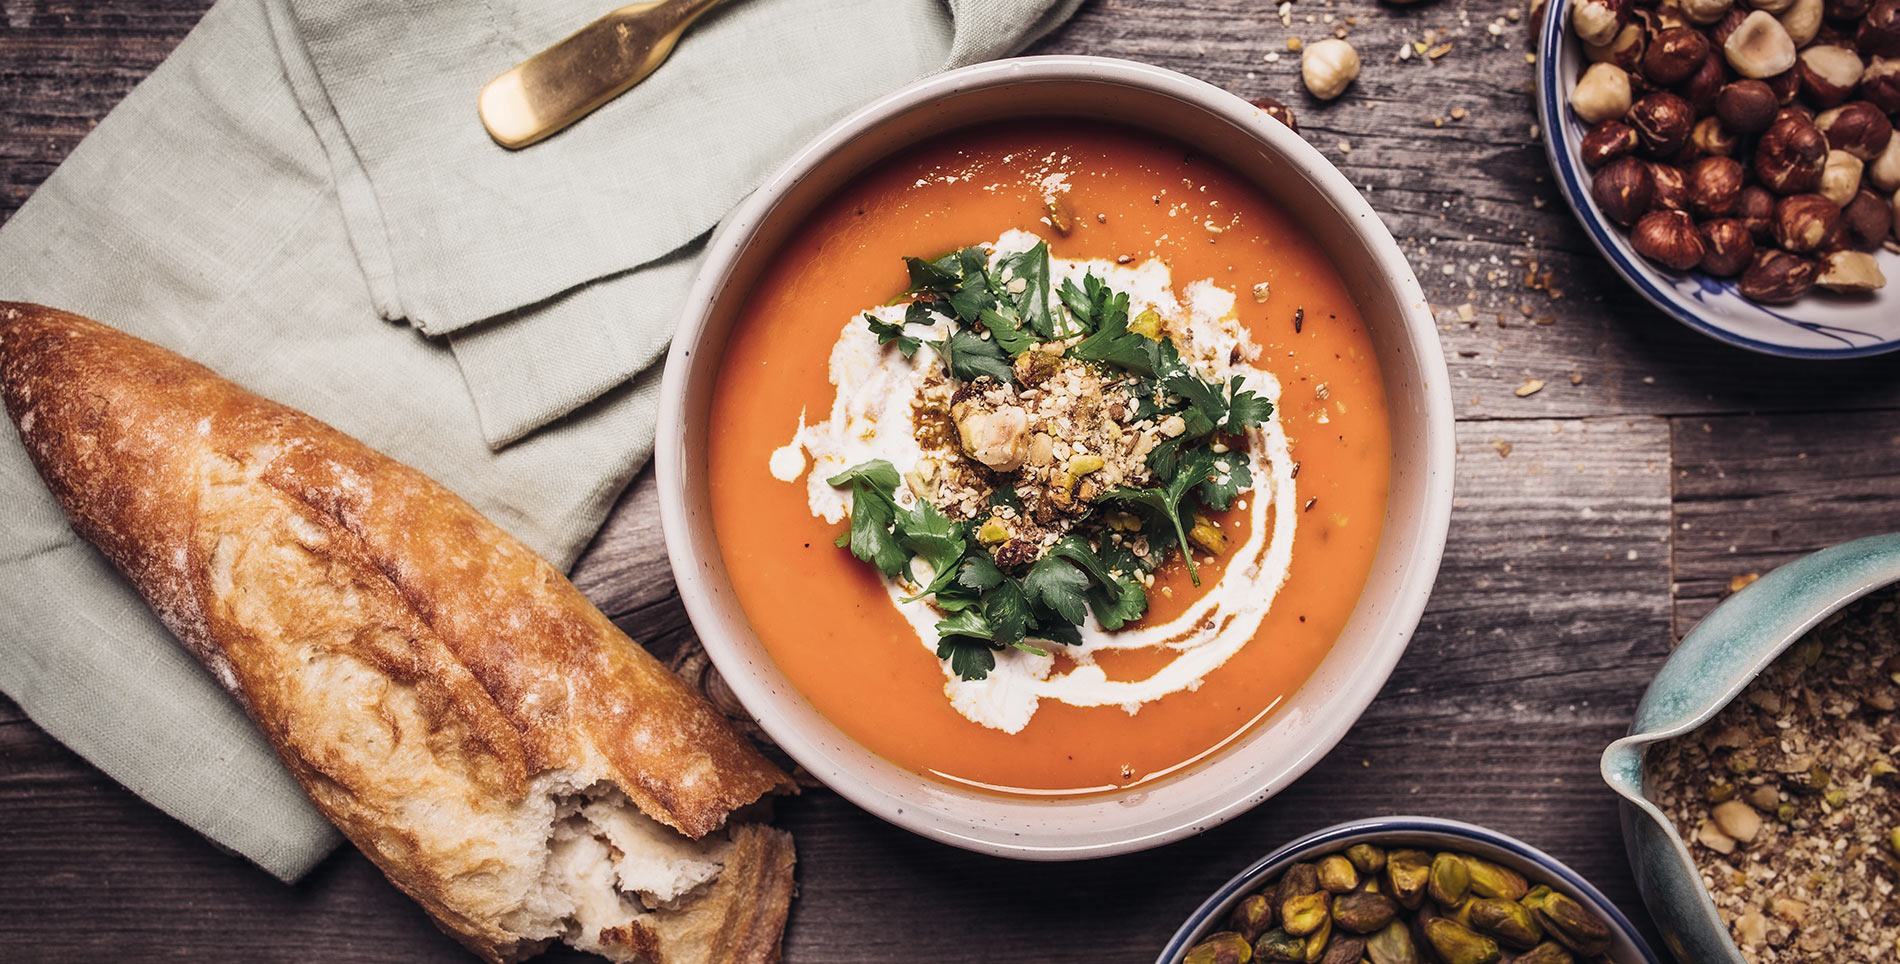 Roasted Carrot Soup with Spiced Hazelnuts